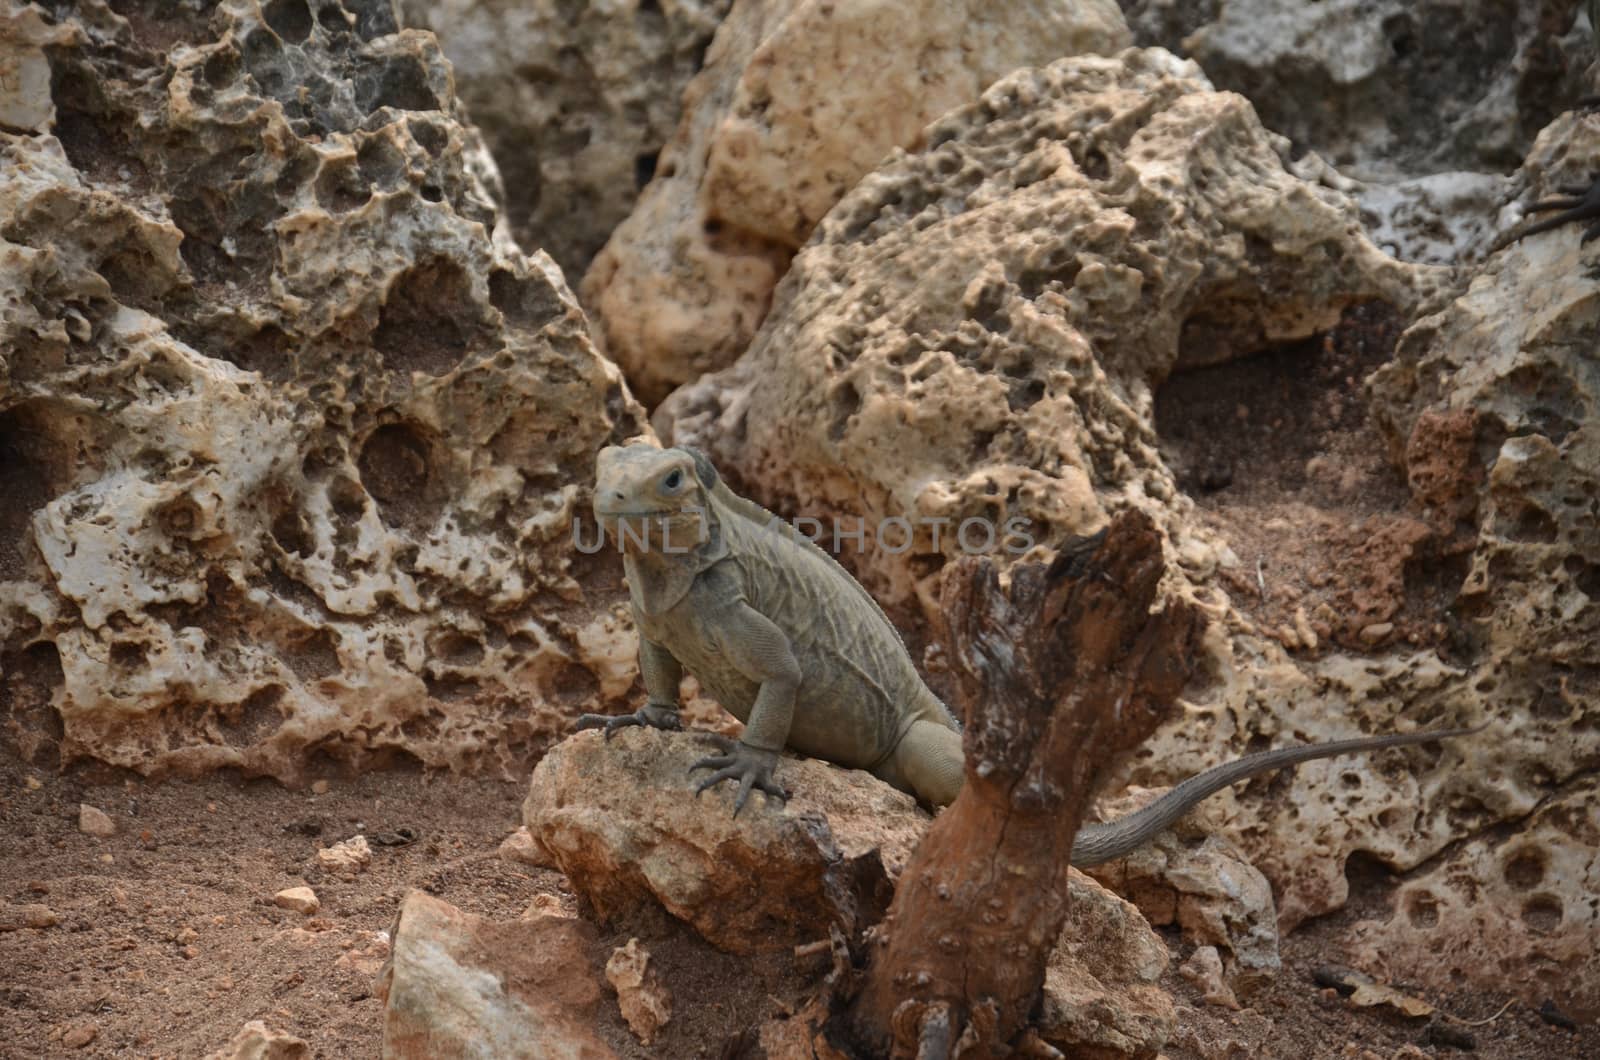 Brown iguanas sitting on the rocks. Fauna Of The Caribbean.